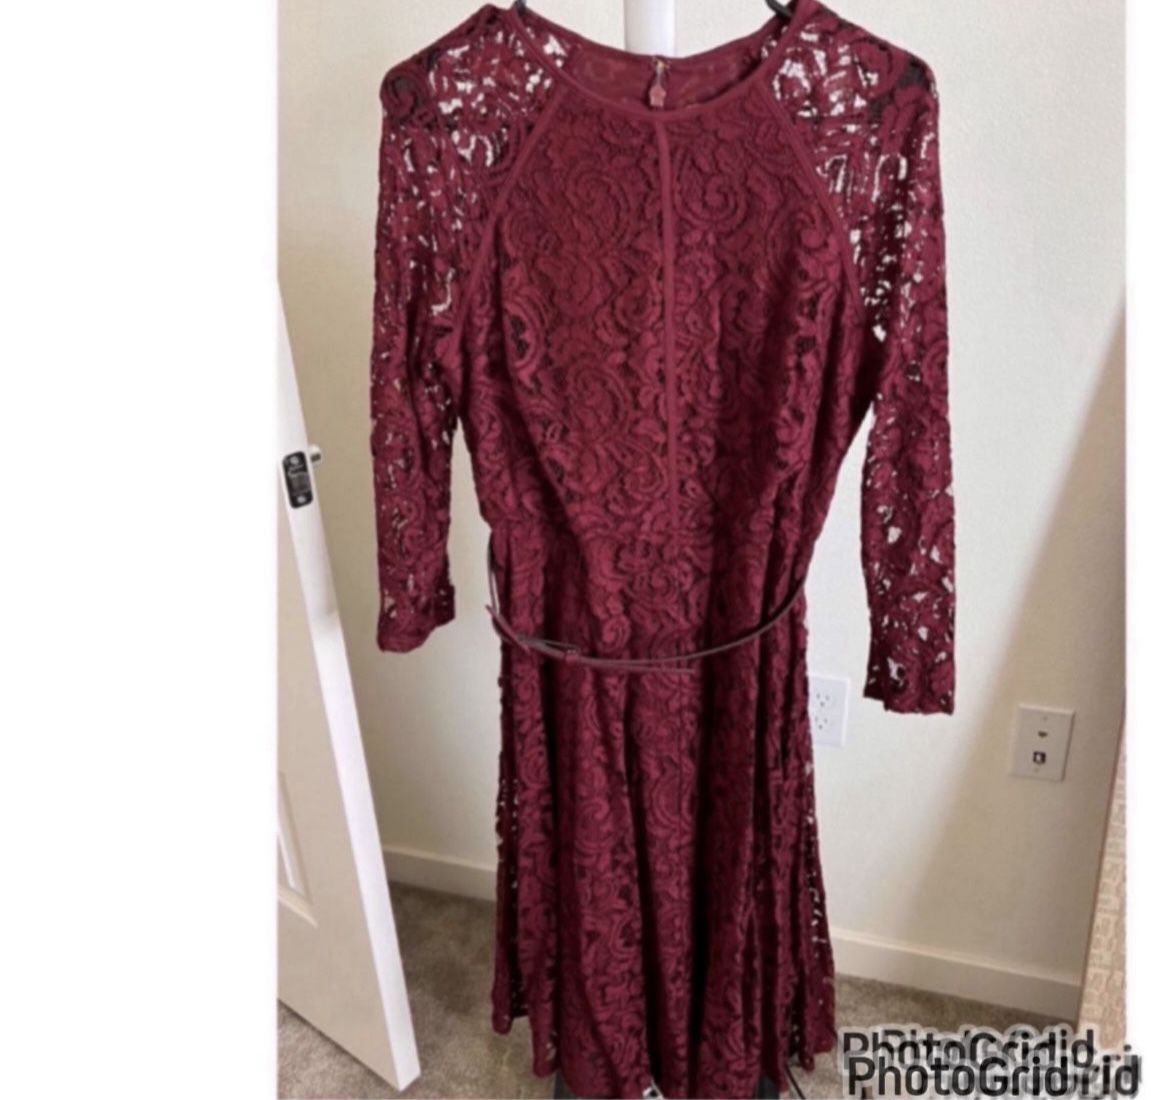 Eva Mendes Dress Size 8 Worn Only Once - Pickup From Northridge Area 